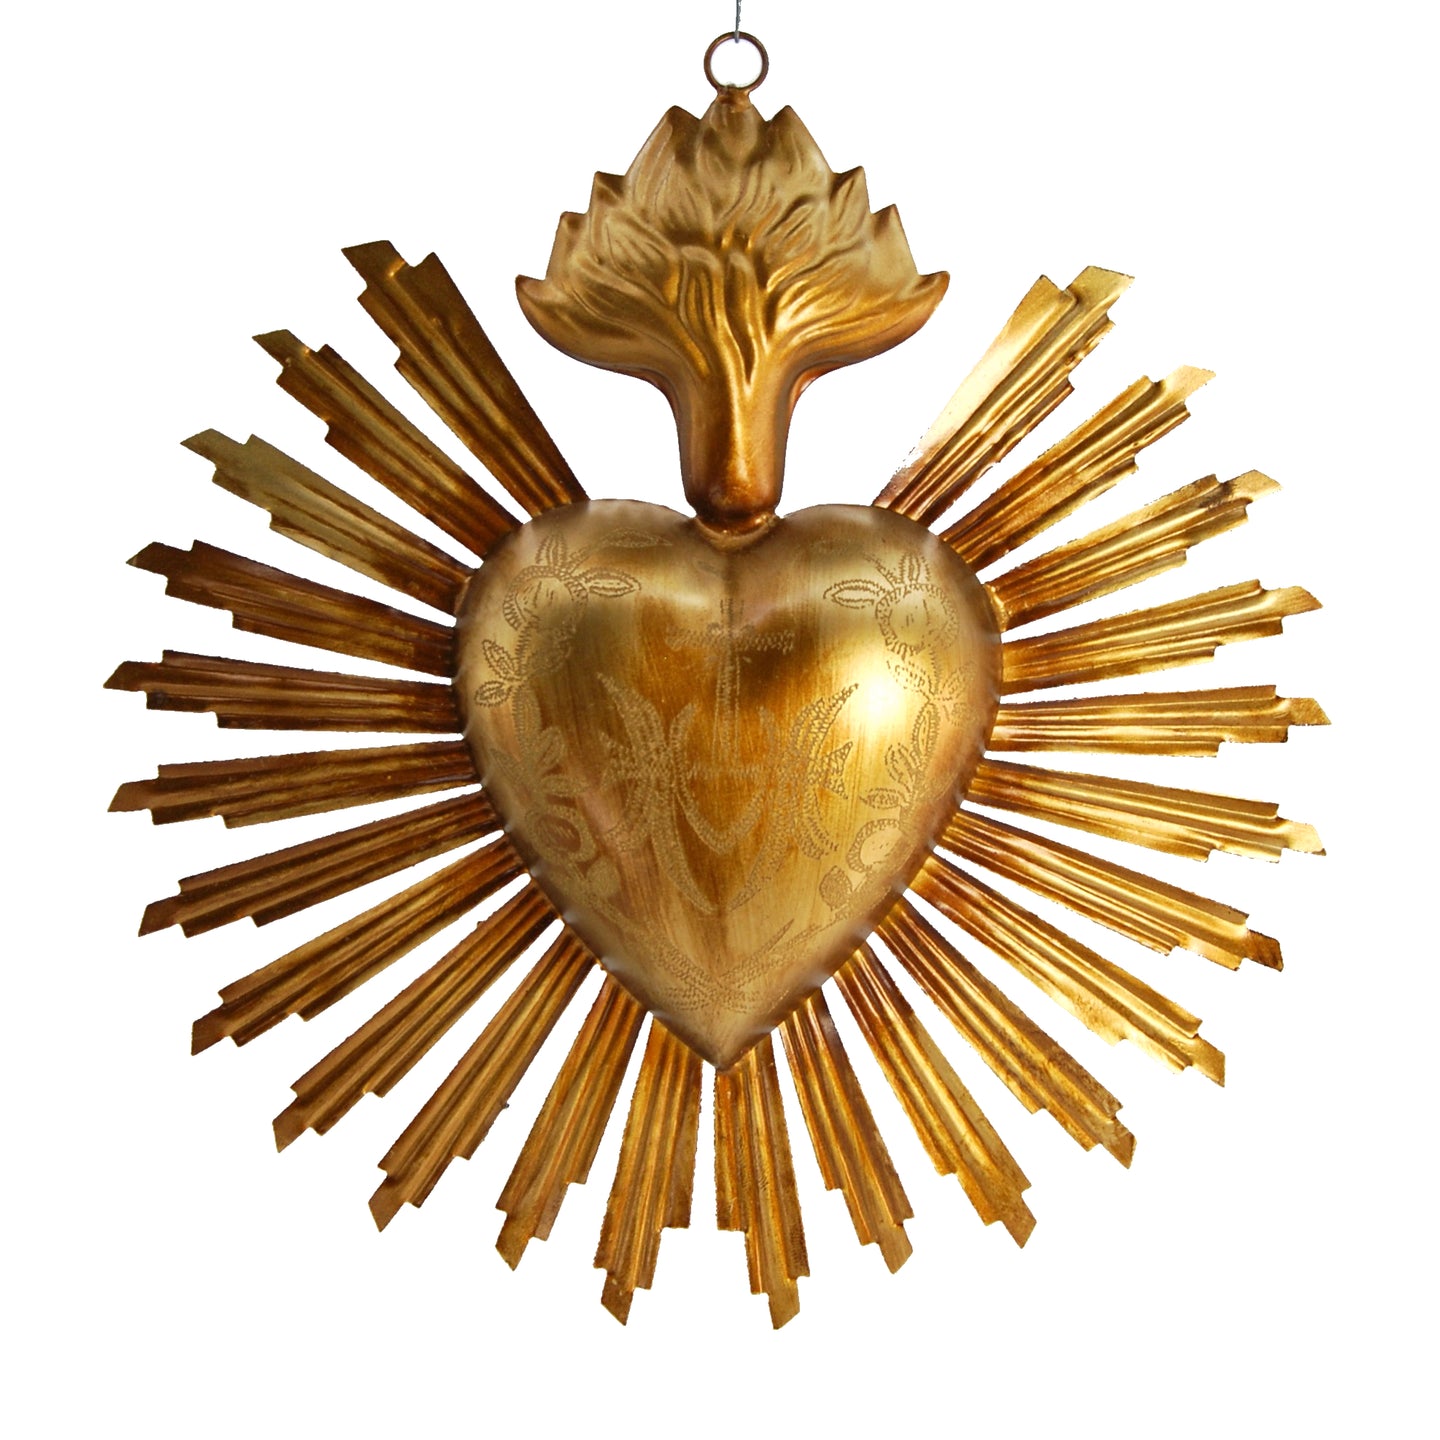 Sacred Heart Ex Voto with Sunray Halo, Antiqued Brass Wall Hanging